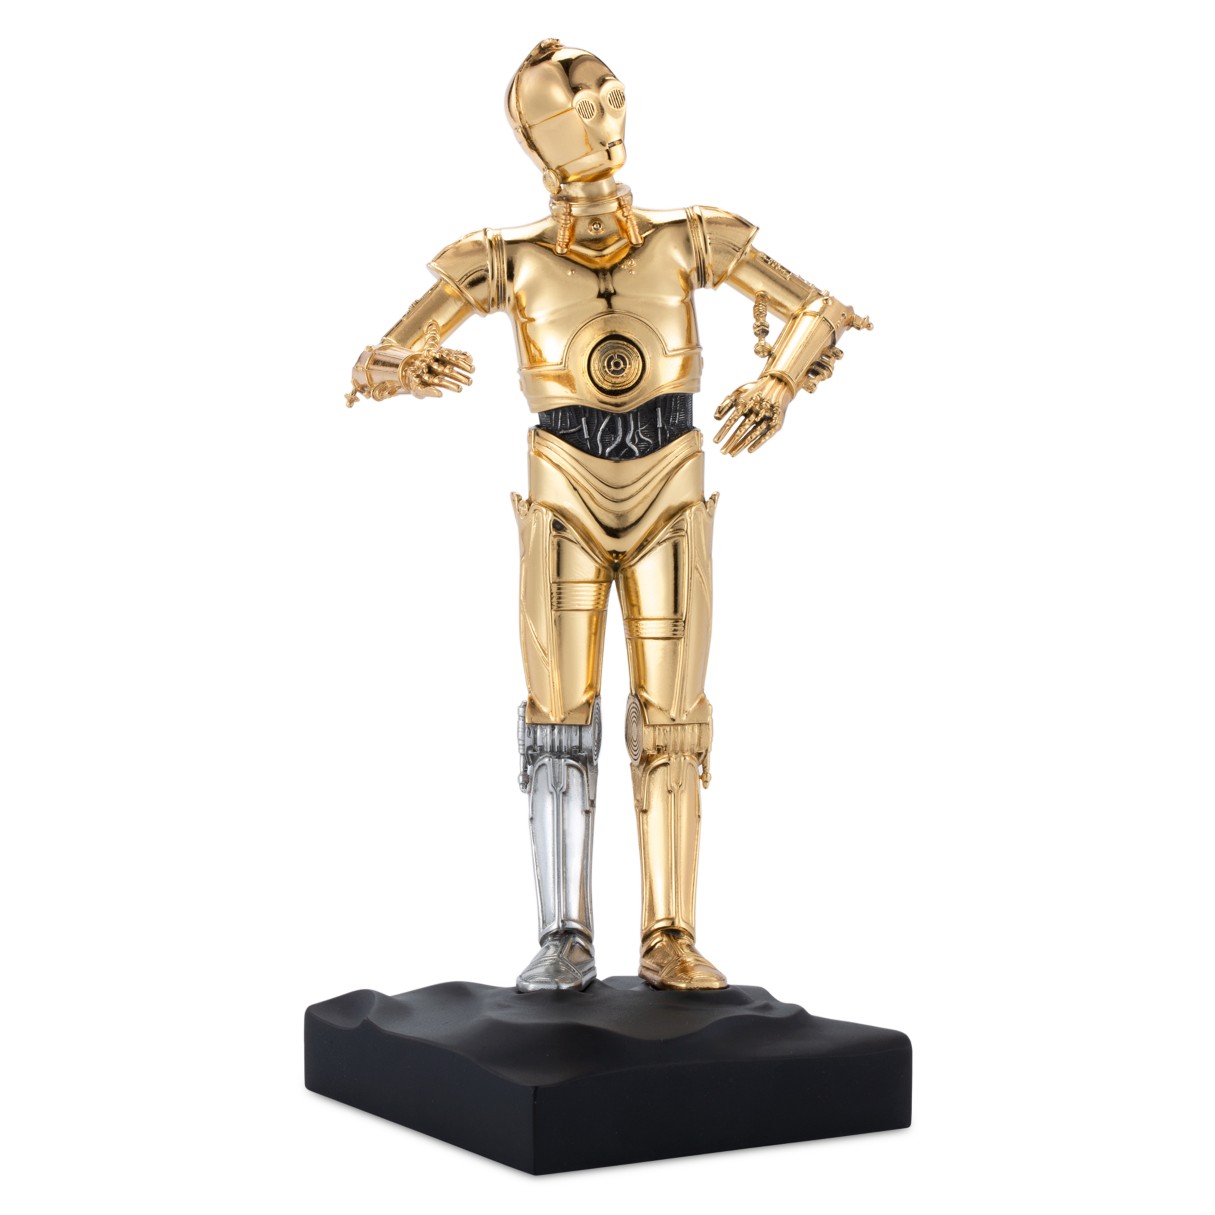 C-3PO Pewter Figurine by Royal Selangor – Star Wars – Limited Edition